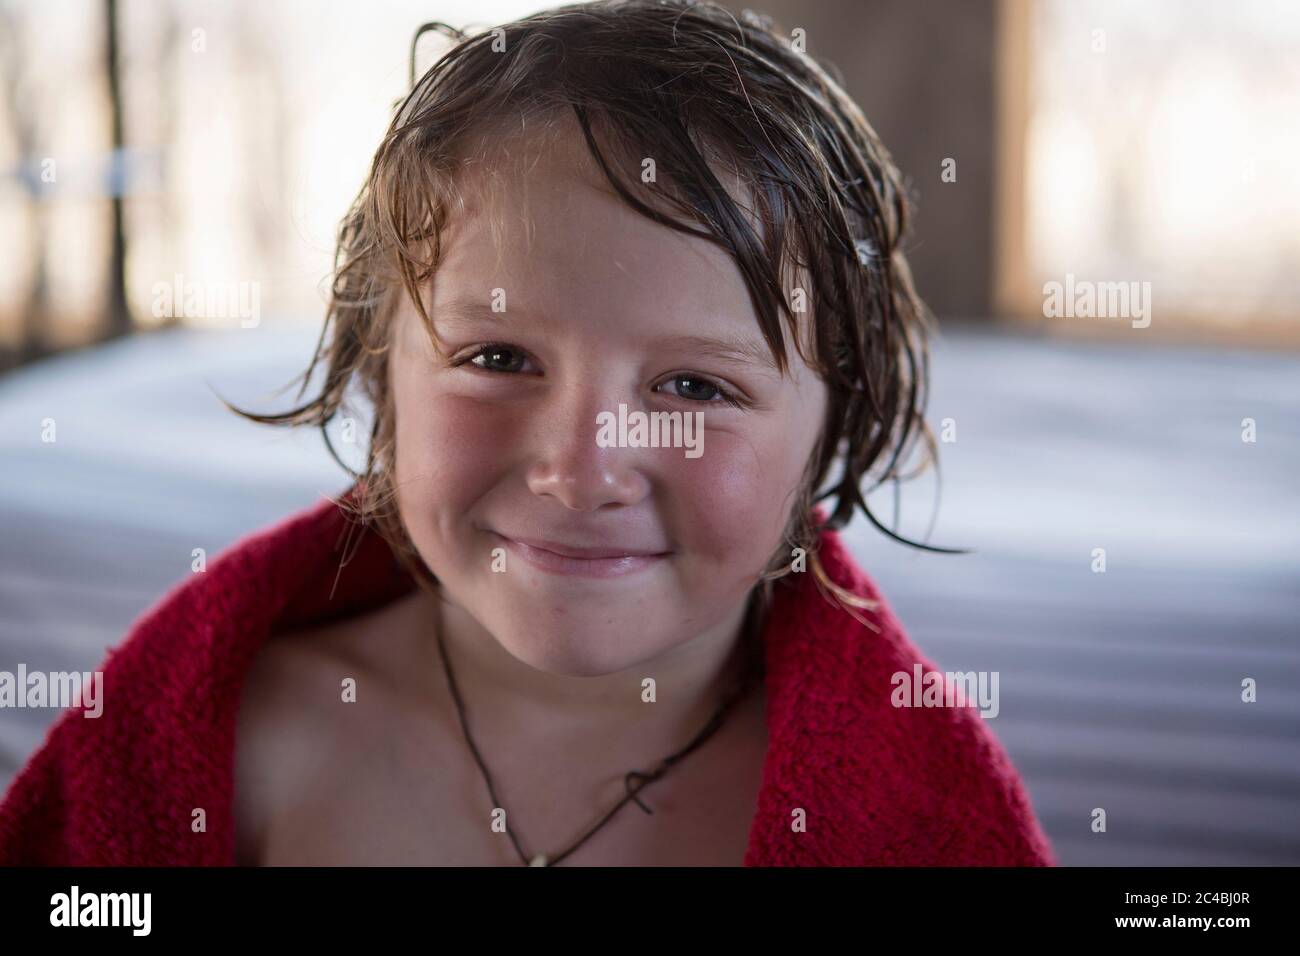 A five year old boy with wet hair and a red towel, smiling. Stock Photo